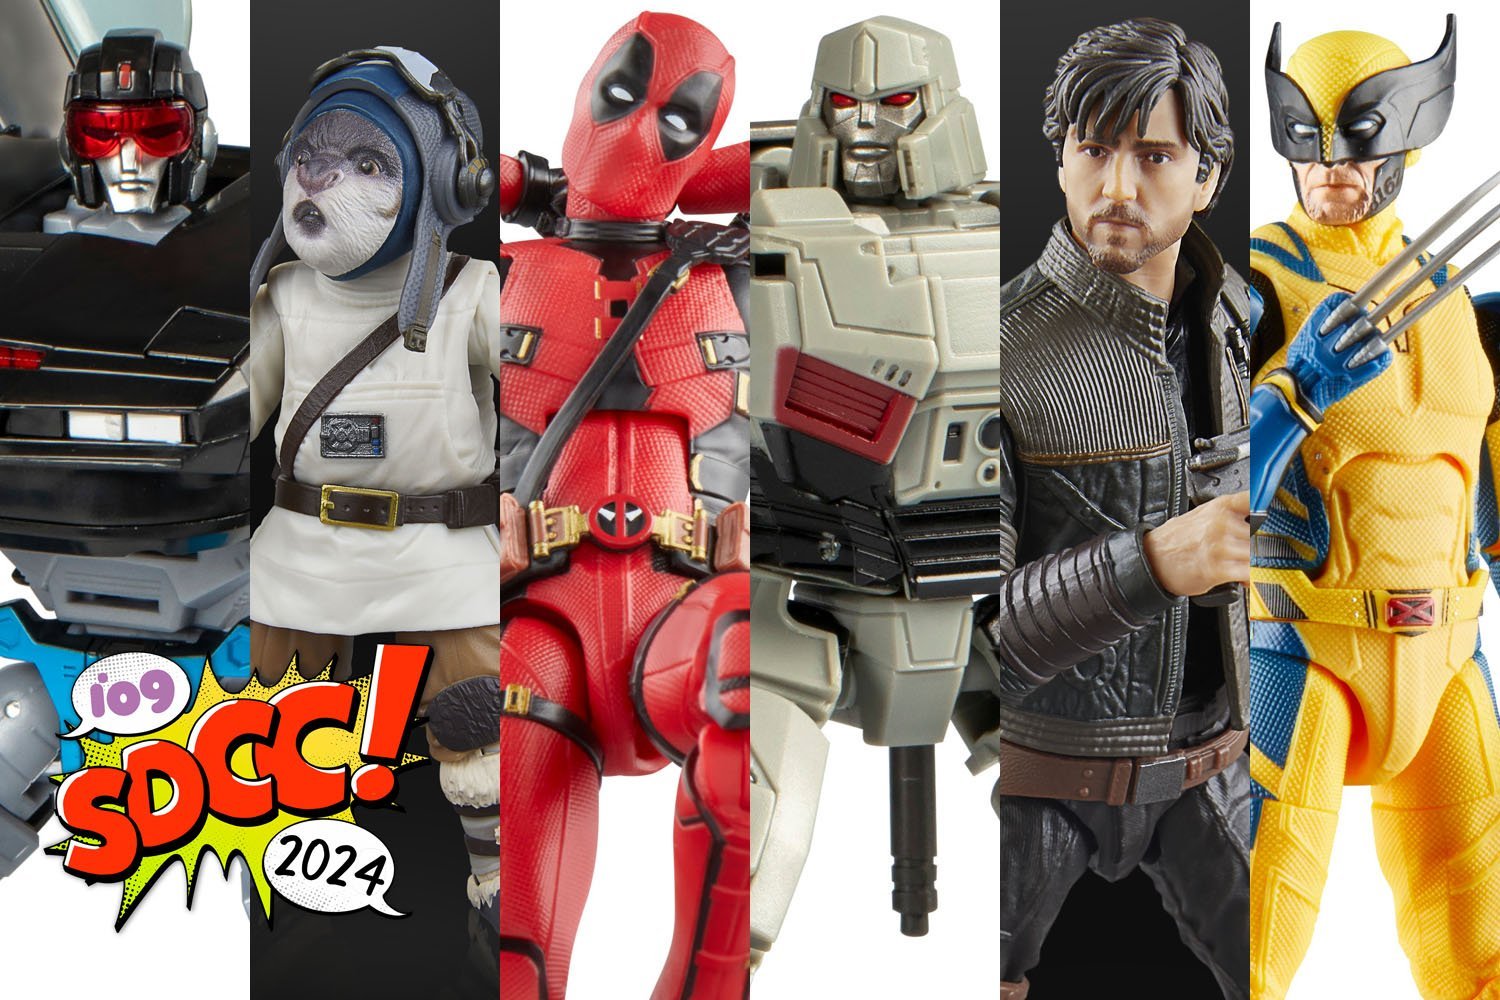 The Coolest Hasbro Star Wars, Marvel, and Transformers Toys Revealed at Comic-Con